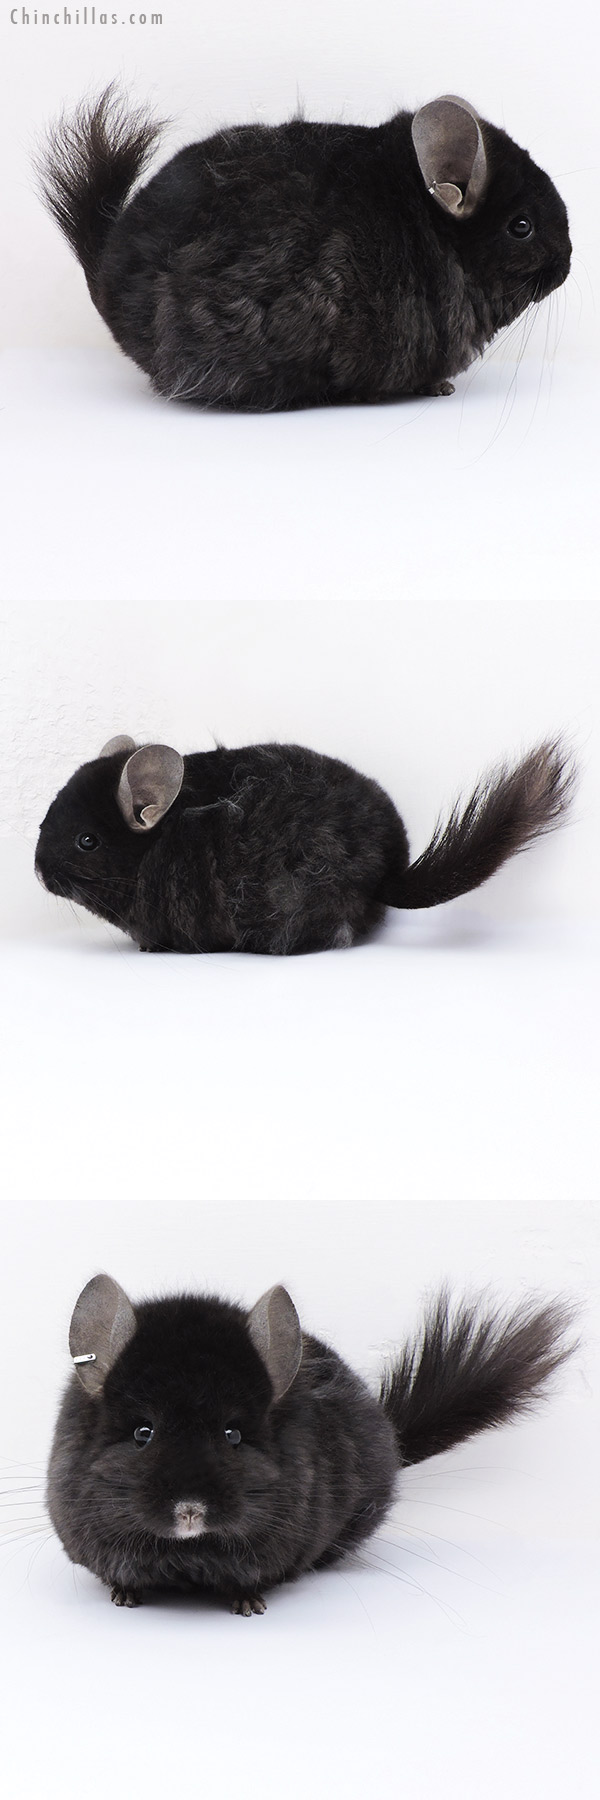 Chinchilla or related item offered for sale or export on Chinchillas.com - 19013 Exceptional Blocky Brevi Type Ebony ( Locken Carrier )  Royal Persian Angora Male Chinchilla